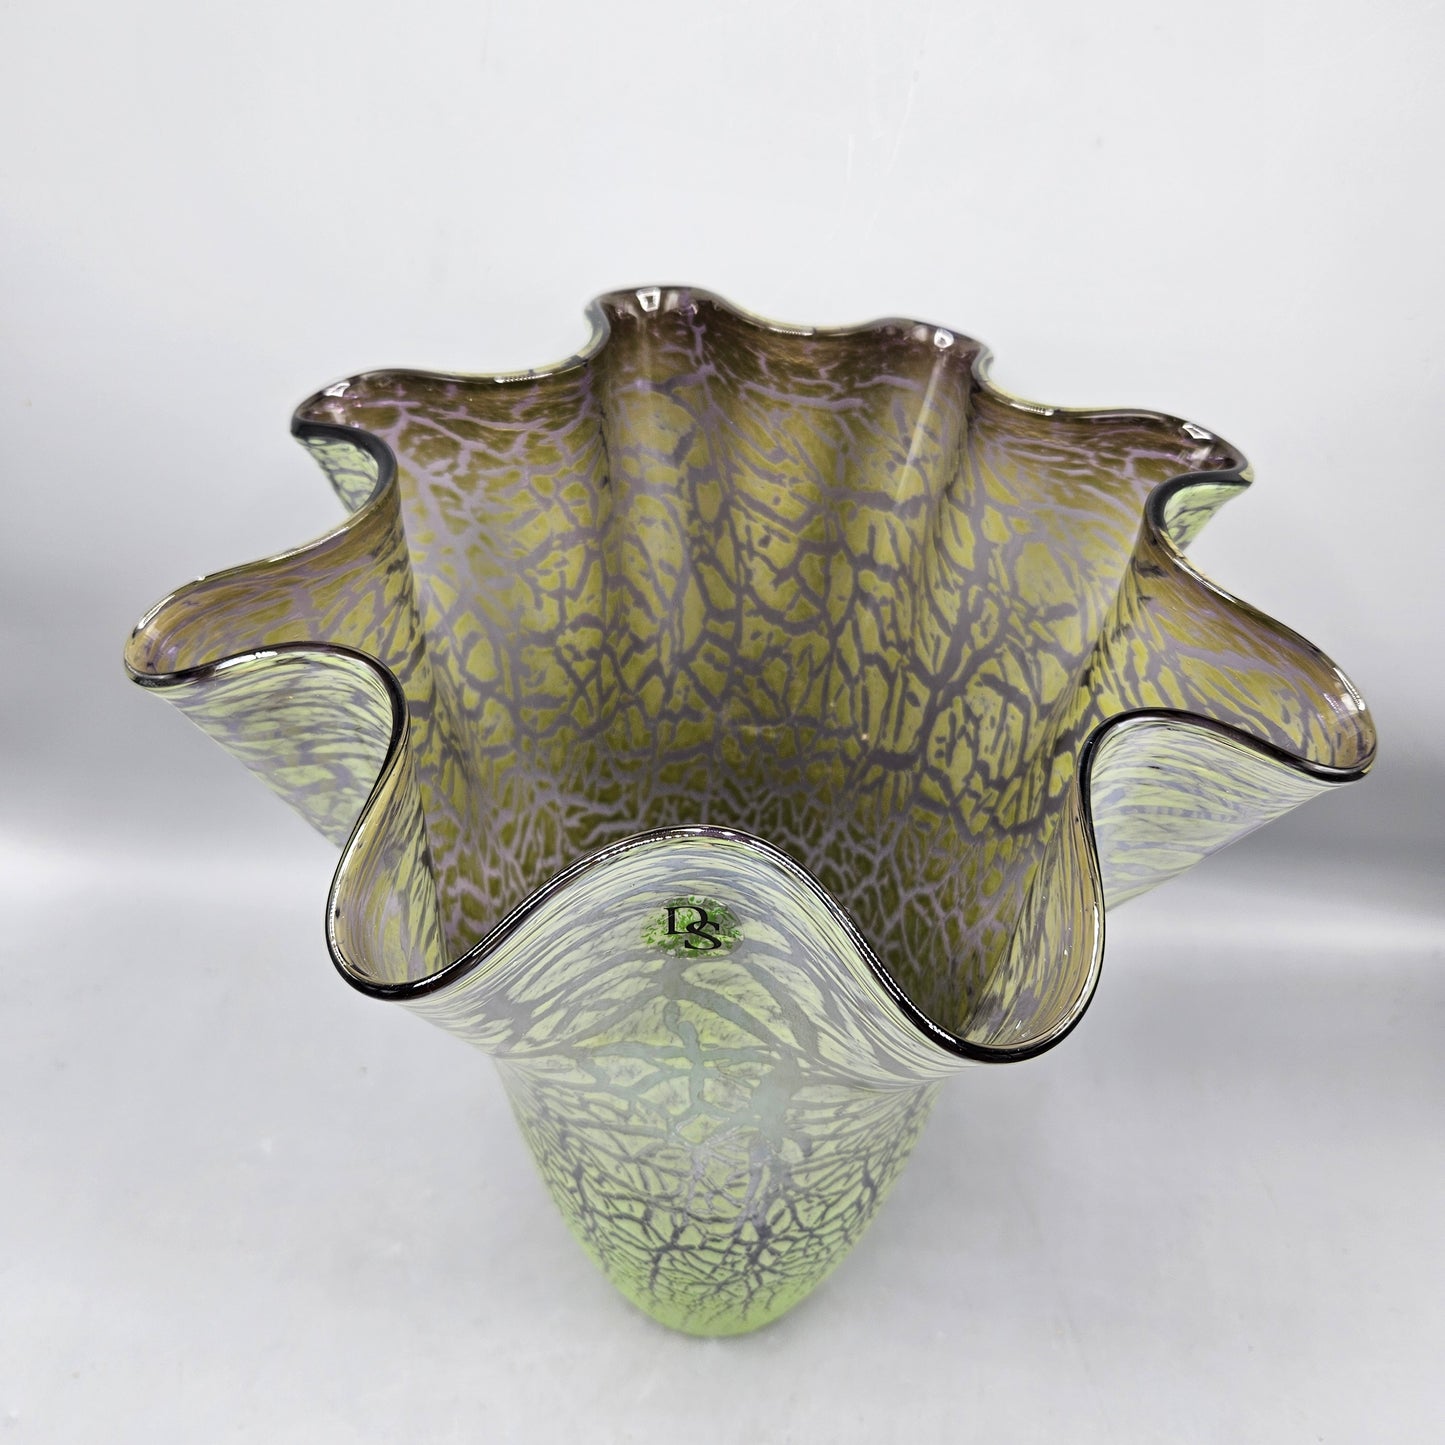 Large DS Studios Glass Green Crackle Art Vase with Ruffled Rim